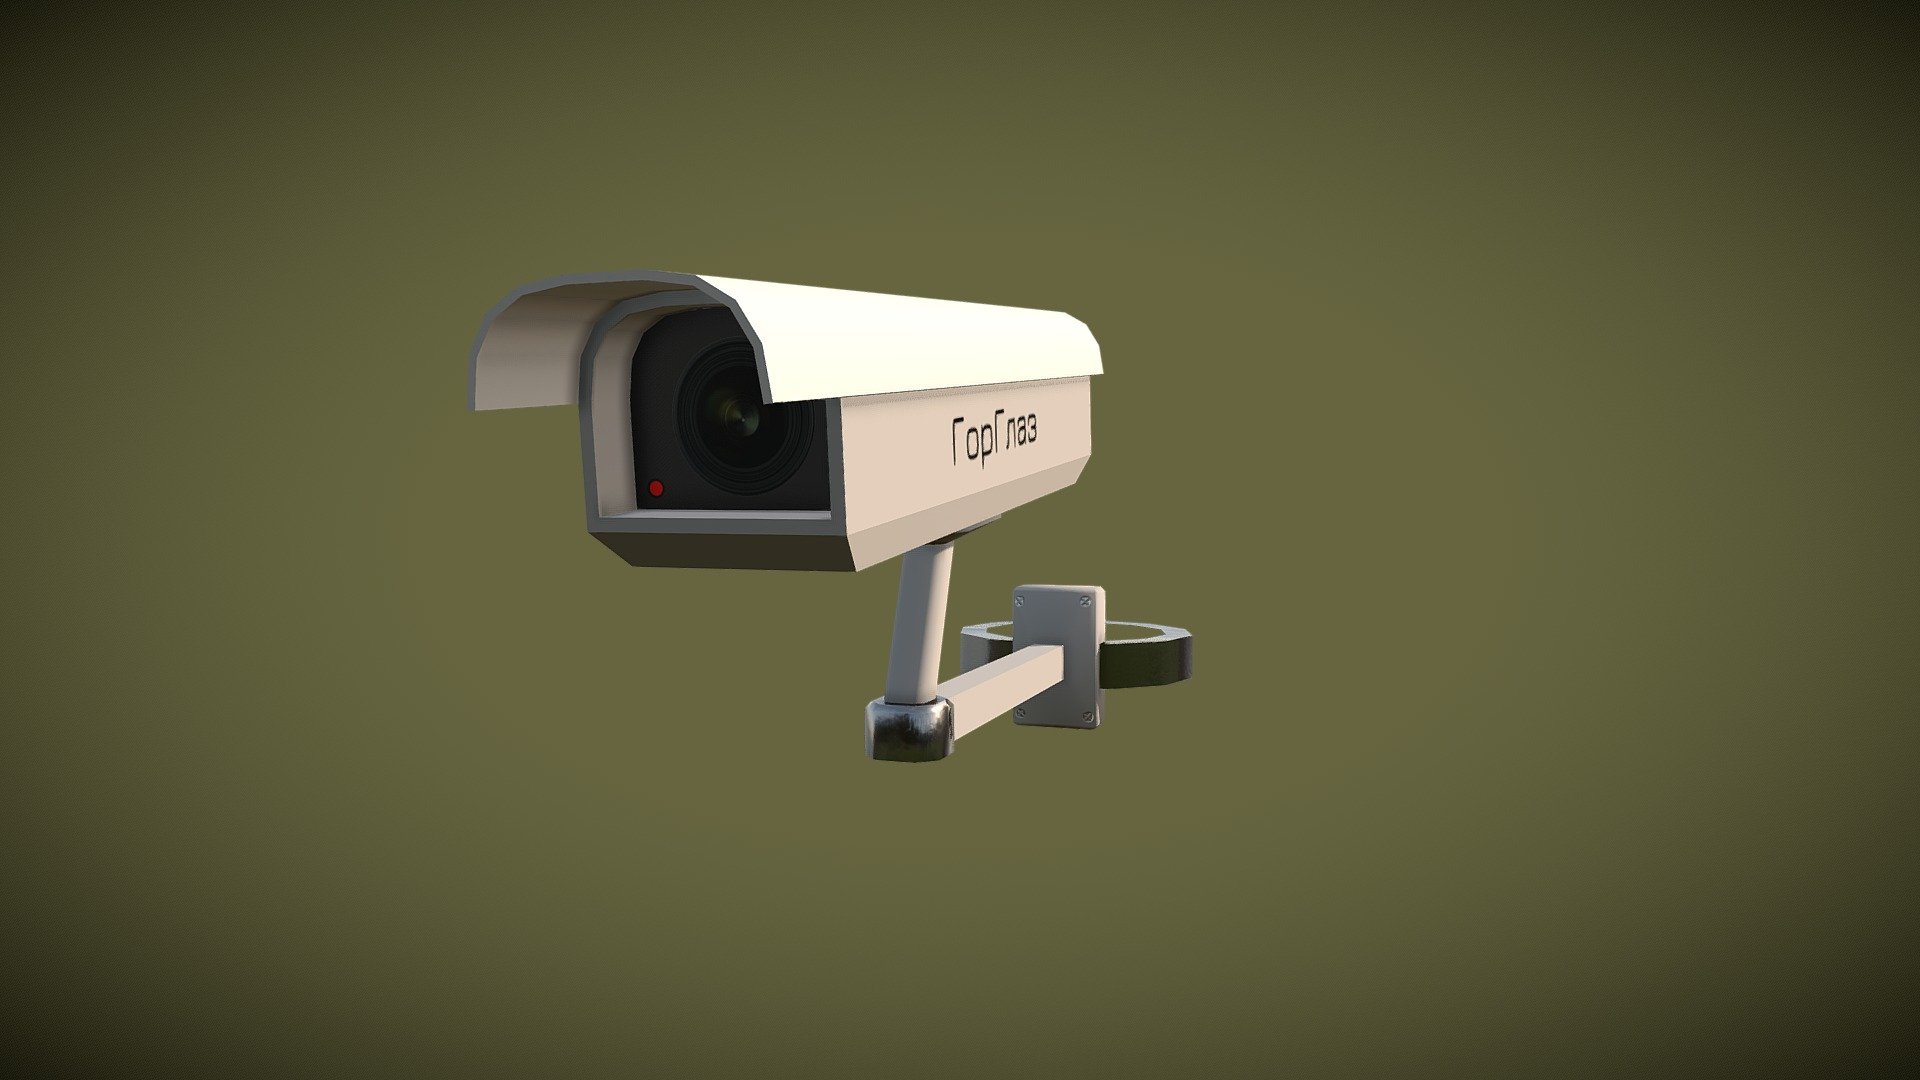 Unity 2K textures. Outdoor surveillance camera. For the game Quantum Number from Karabas Studio. https://quantumnumber.net/ - Camera - 3D model by Karabas Studio (@Alexei777) 3d model